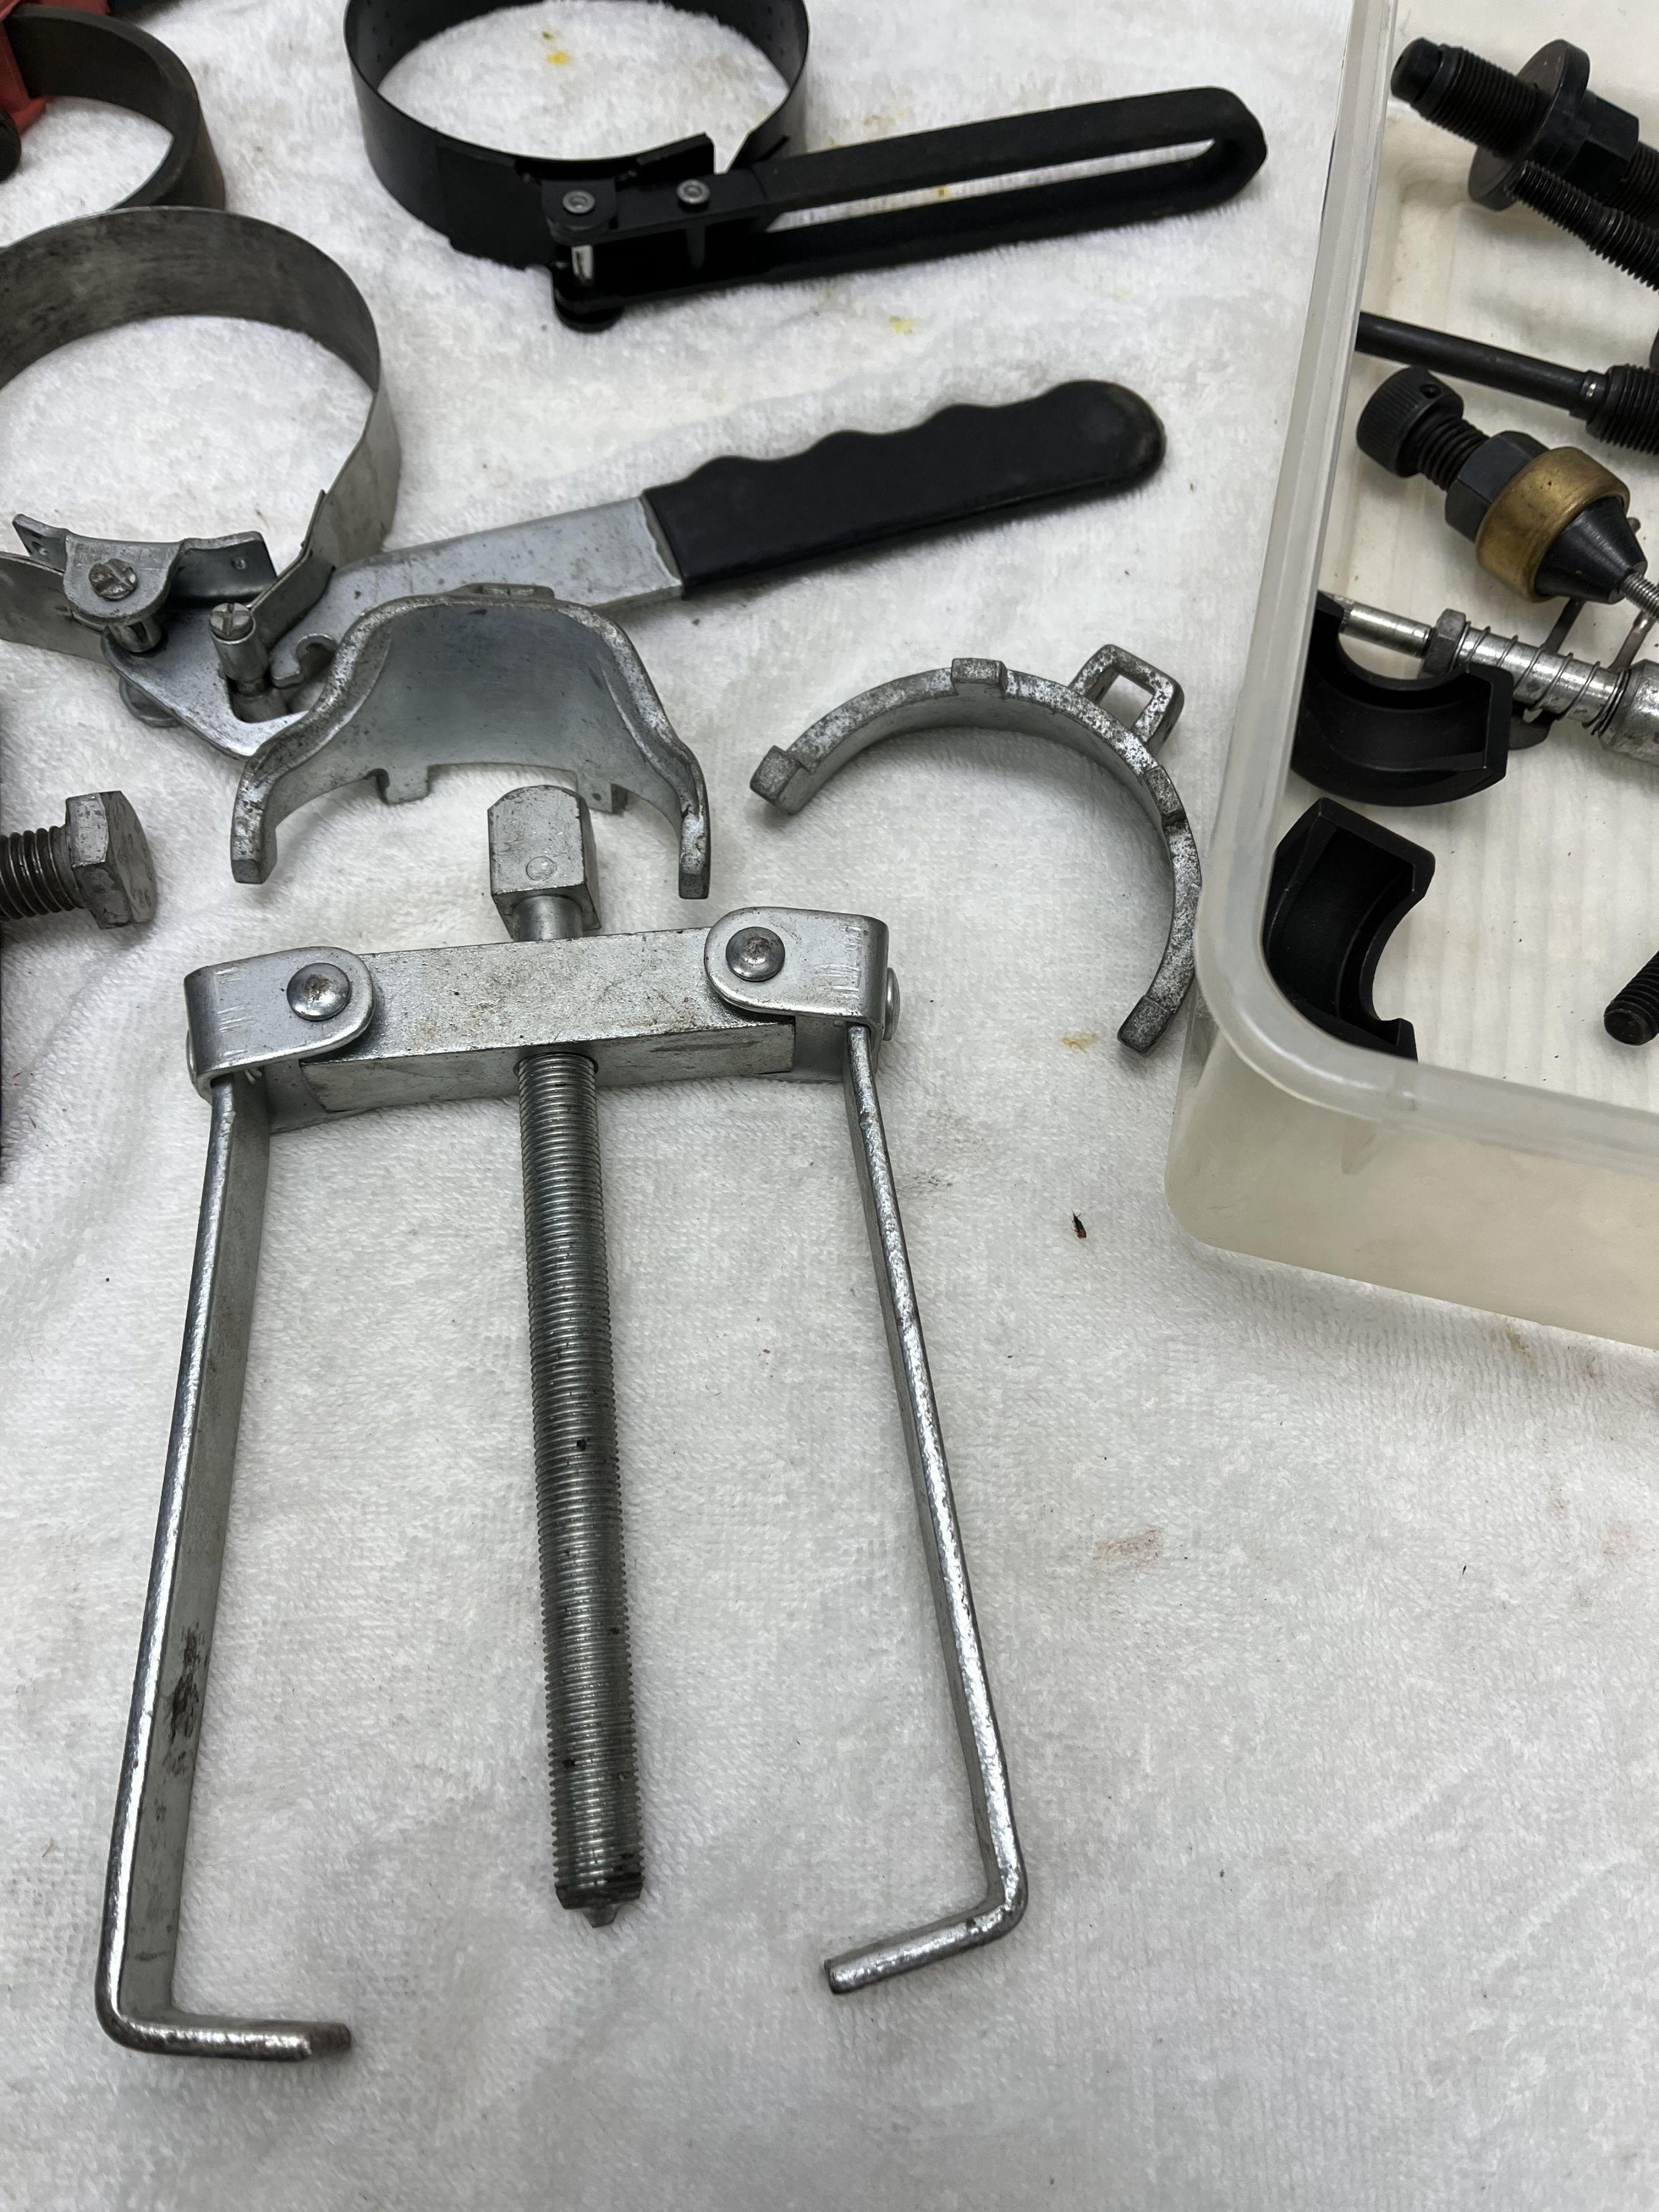 Small Tote Full/Oil Filter Wrenches, Pulley Pullers, ETC